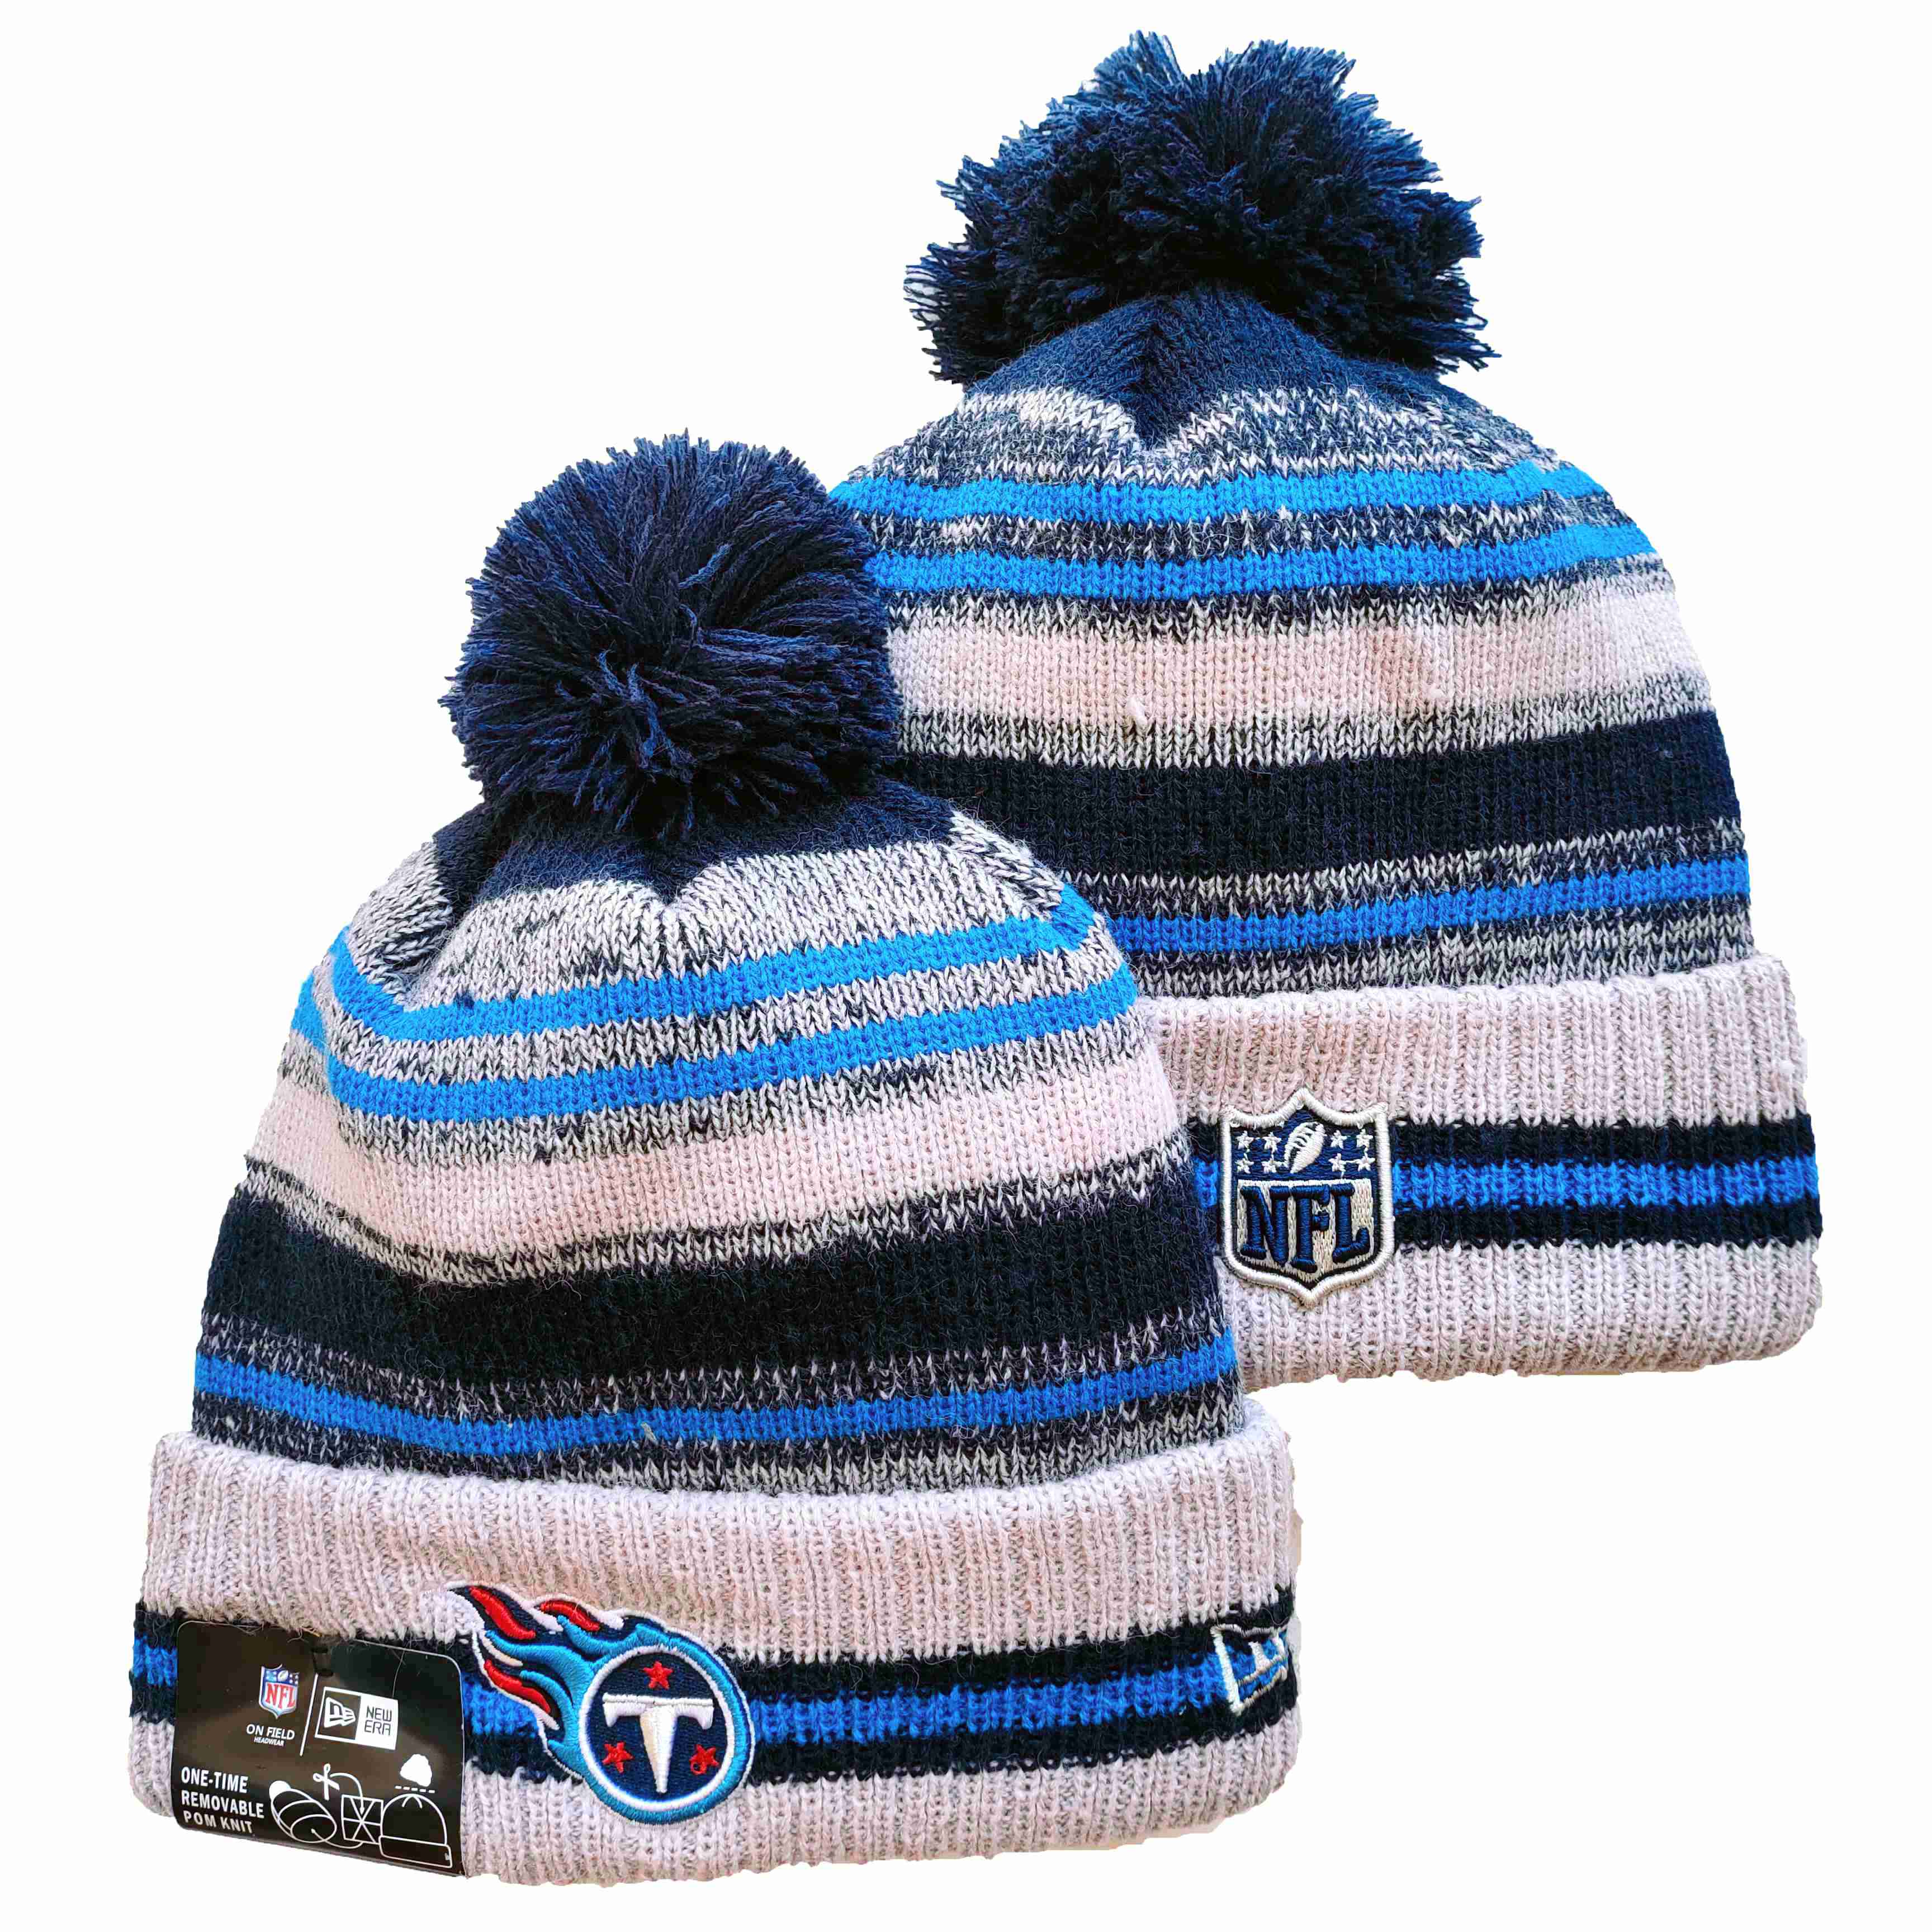 NFL Tennessee Titans Beanies Knit Hats-YD1315